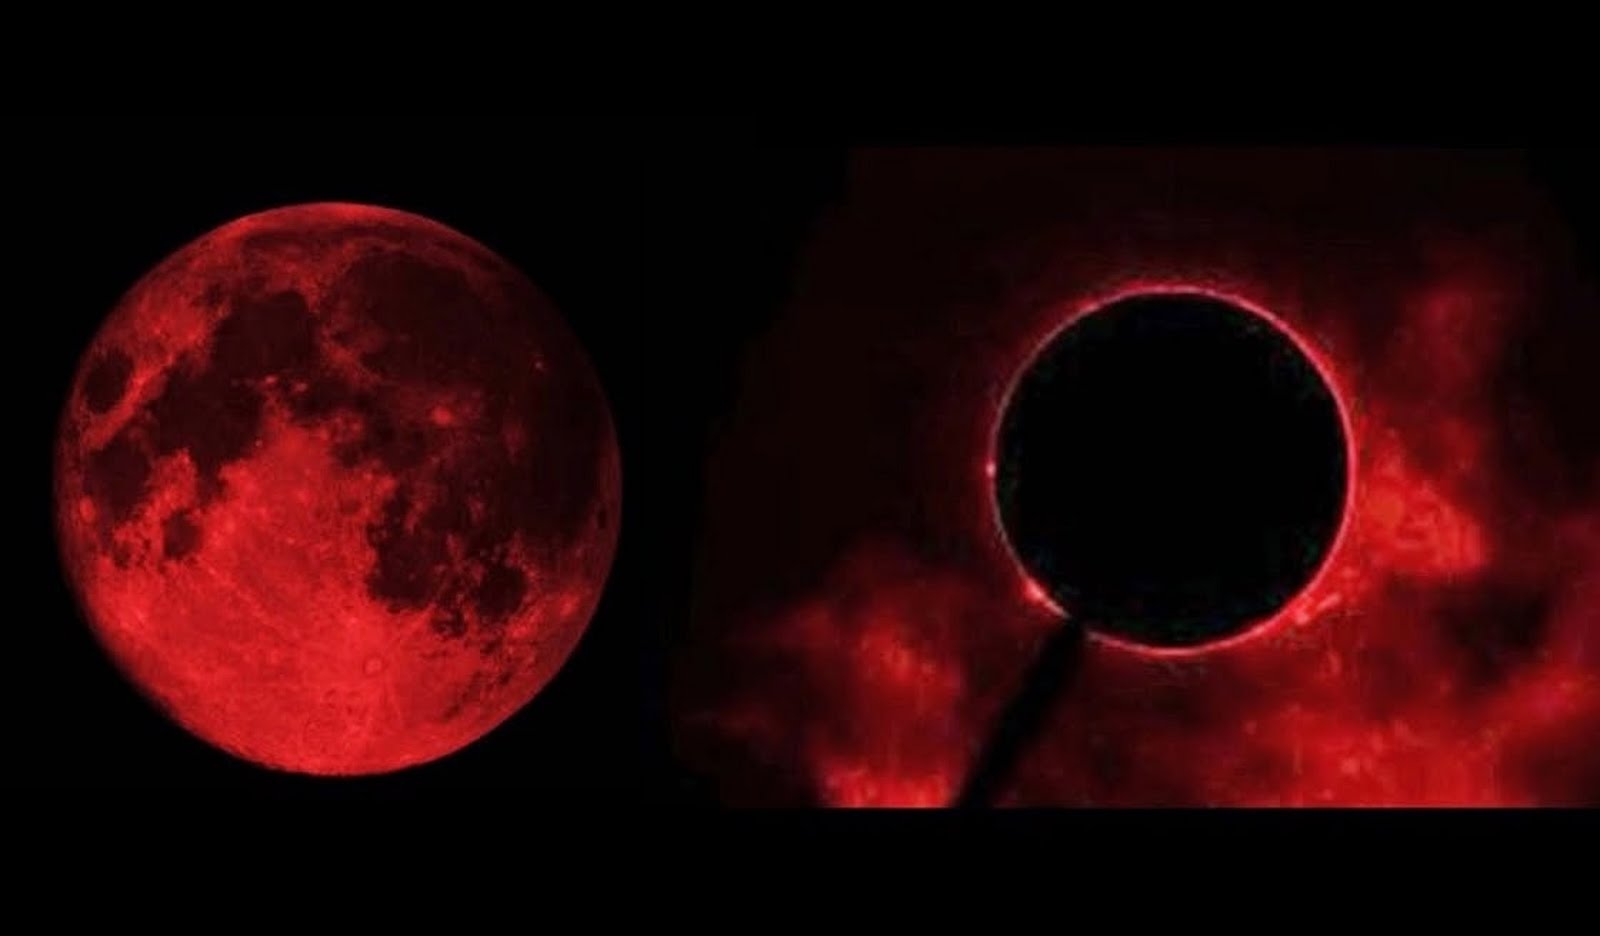 THE BLOOD MOONS OF 2014 - THE TETRON CYCLE